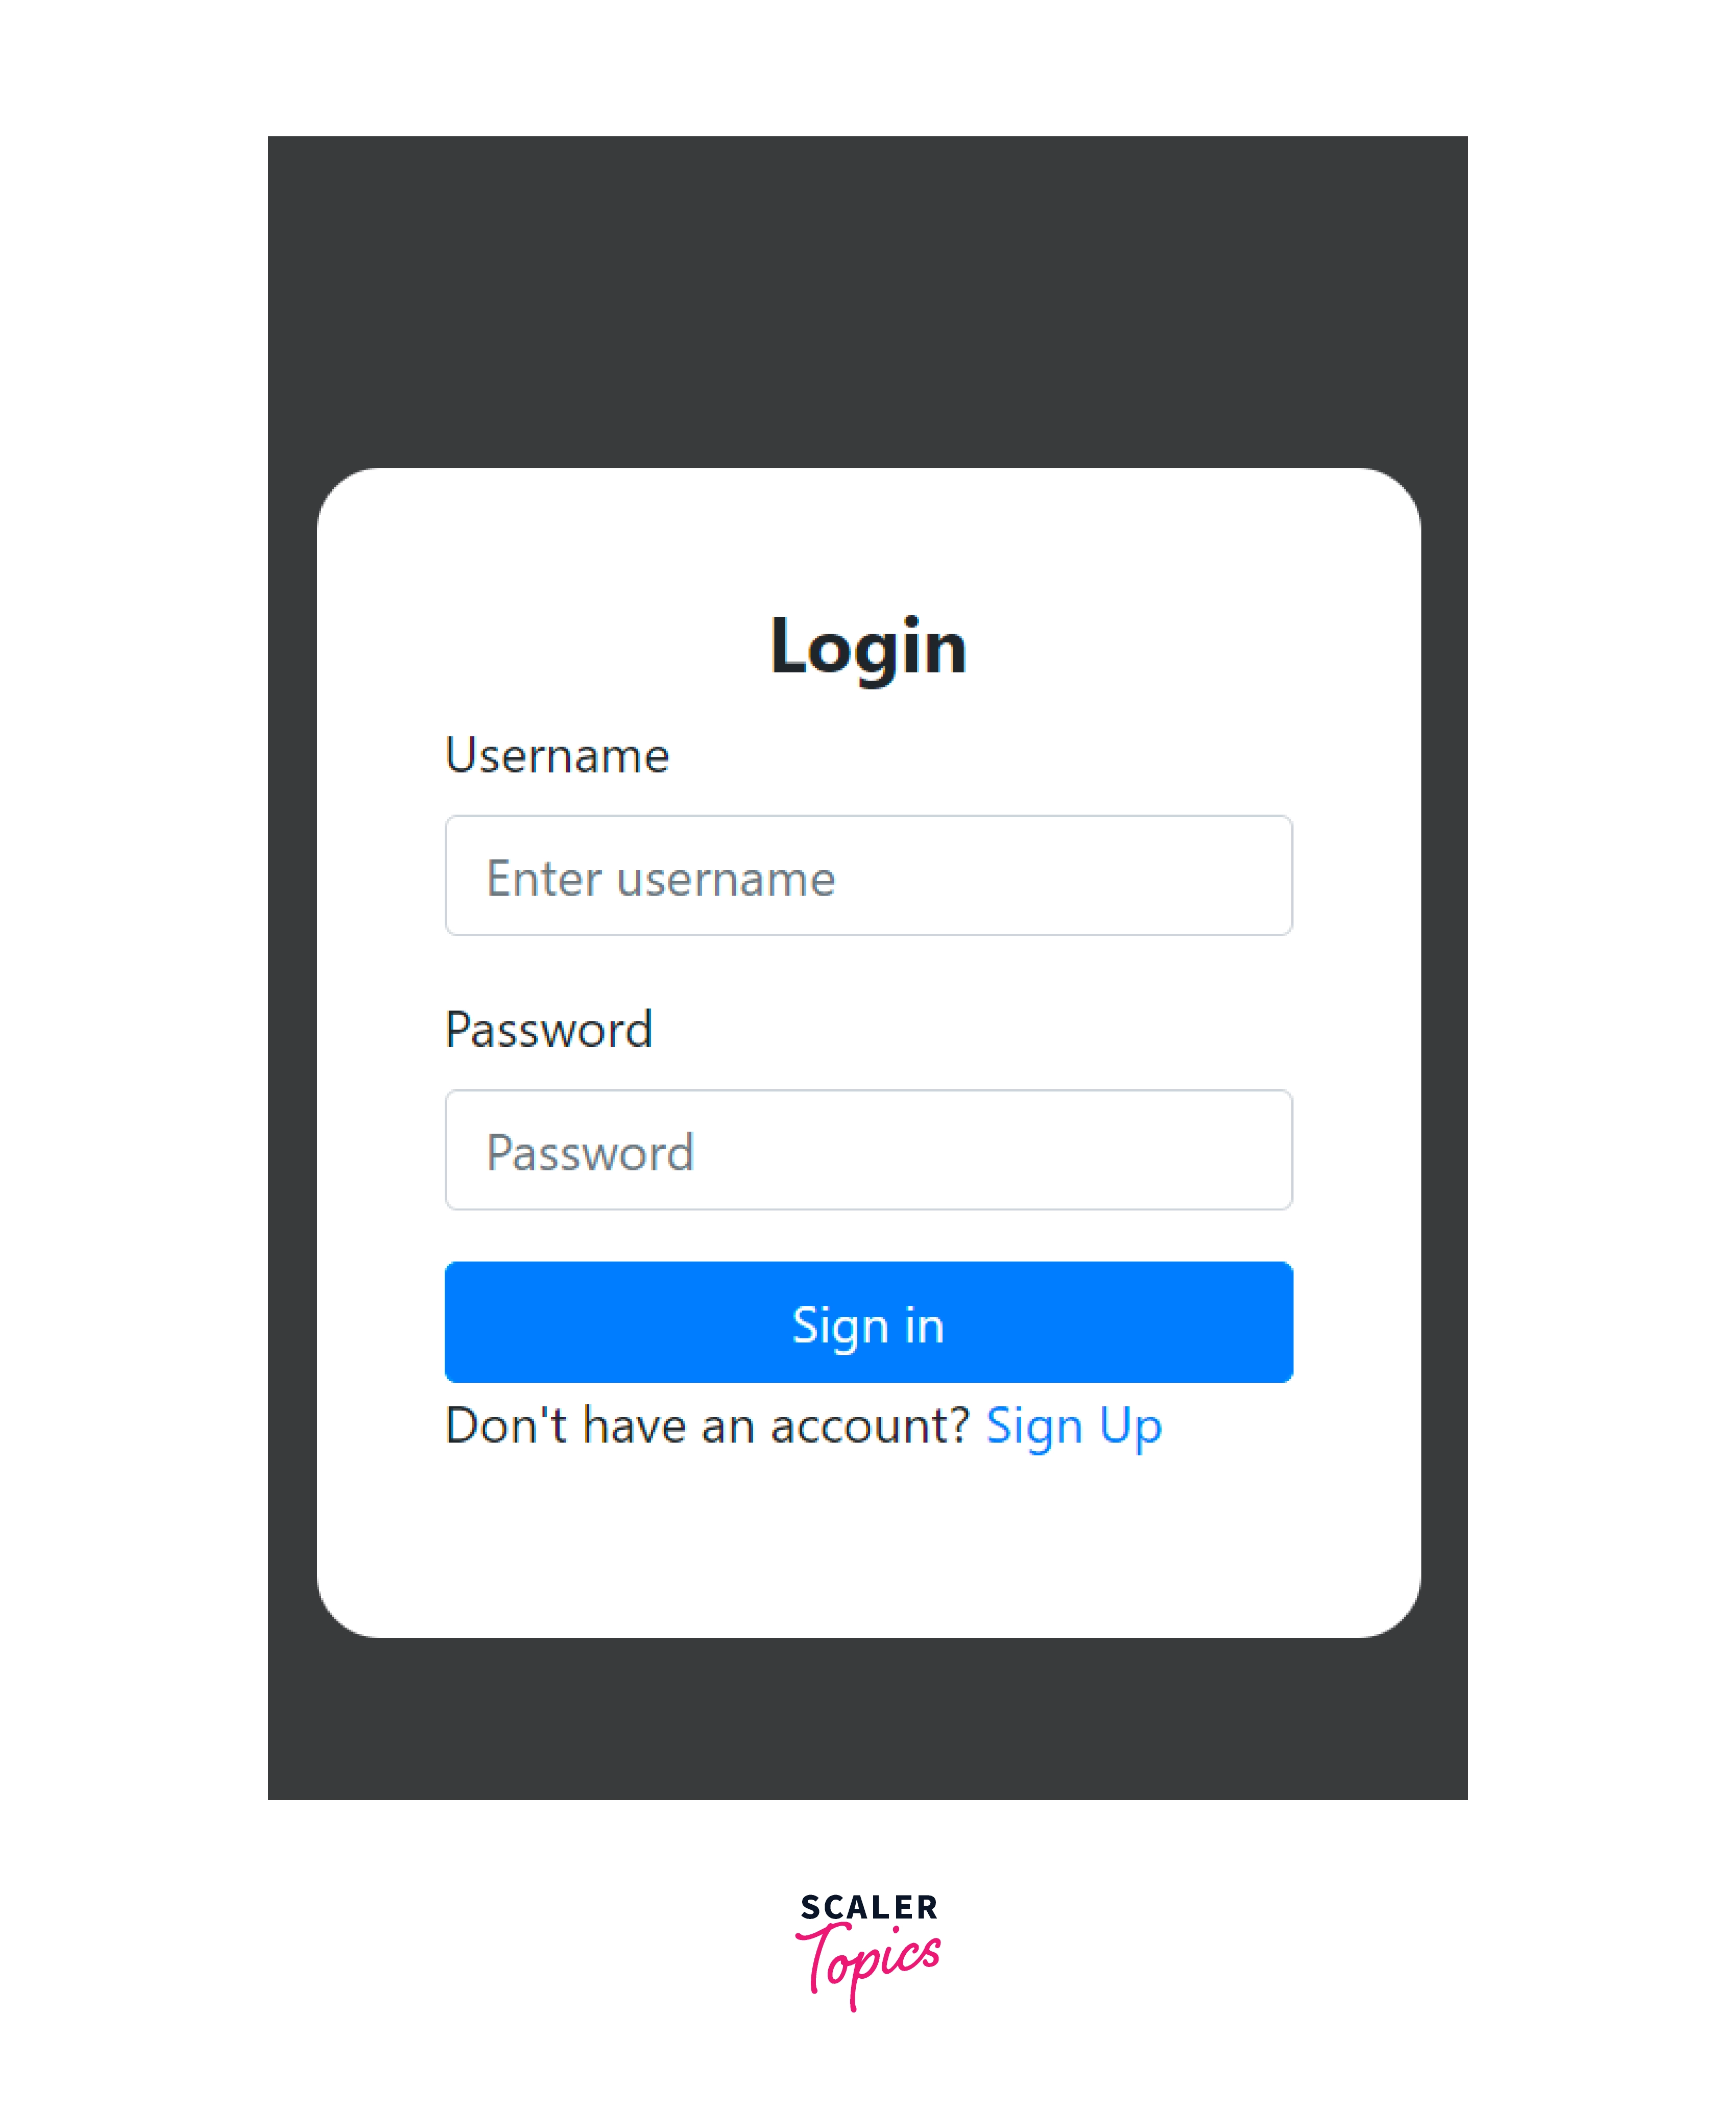 Login Form in Mobile View